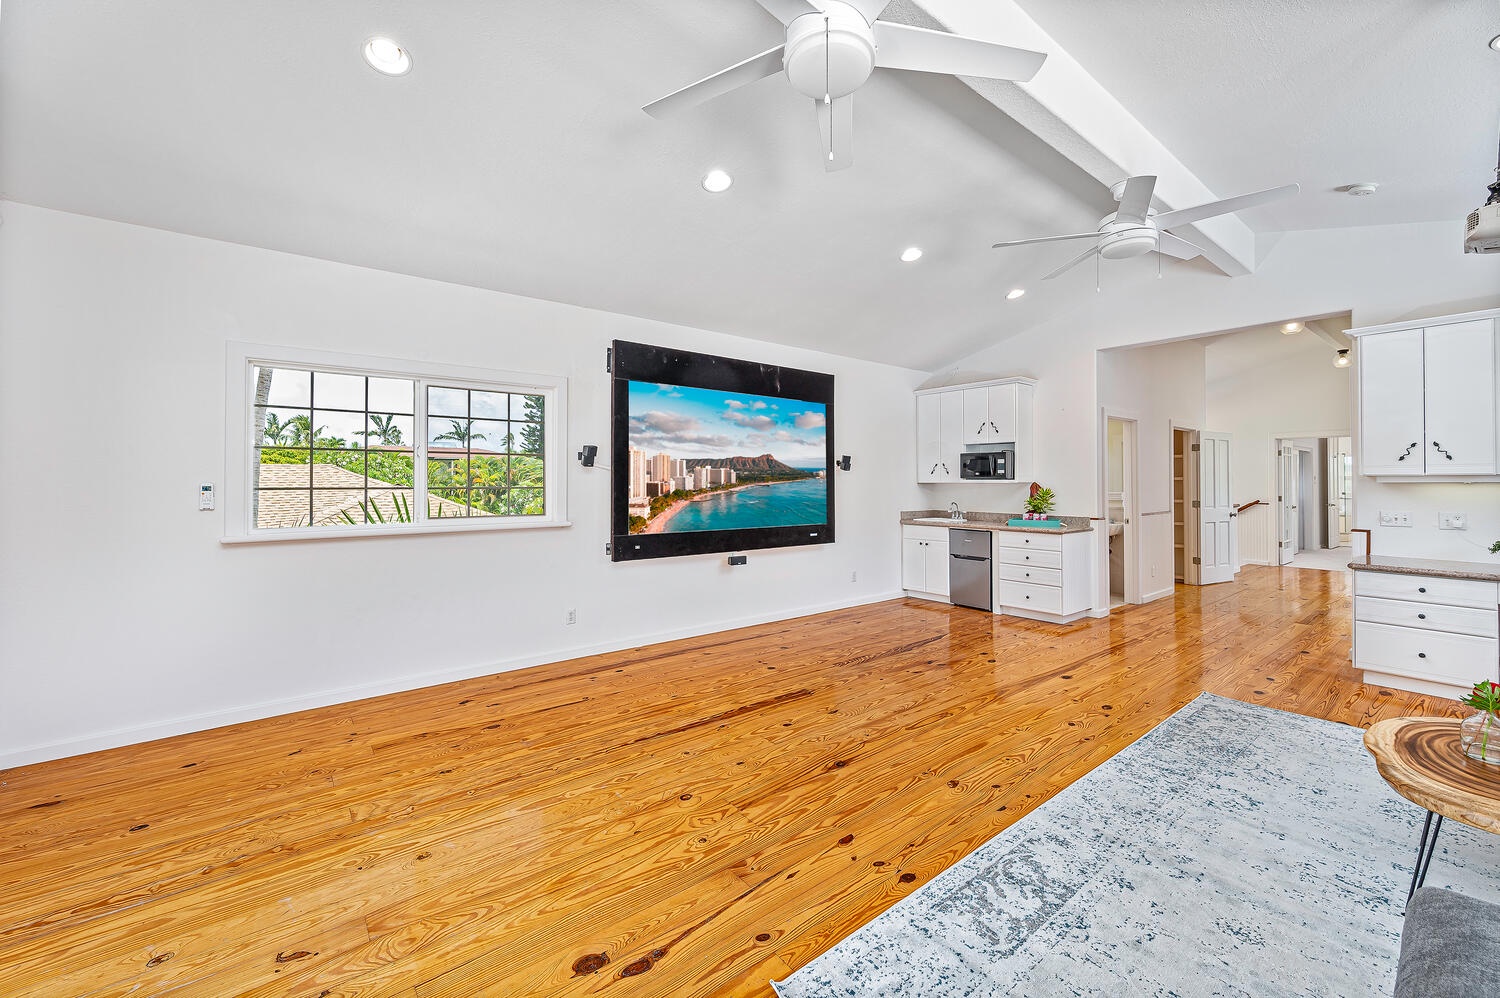 Kailua Vacation Rentals, Villa Hui Hou - Media room! Perfect place to get cozy after a long day at the beach!